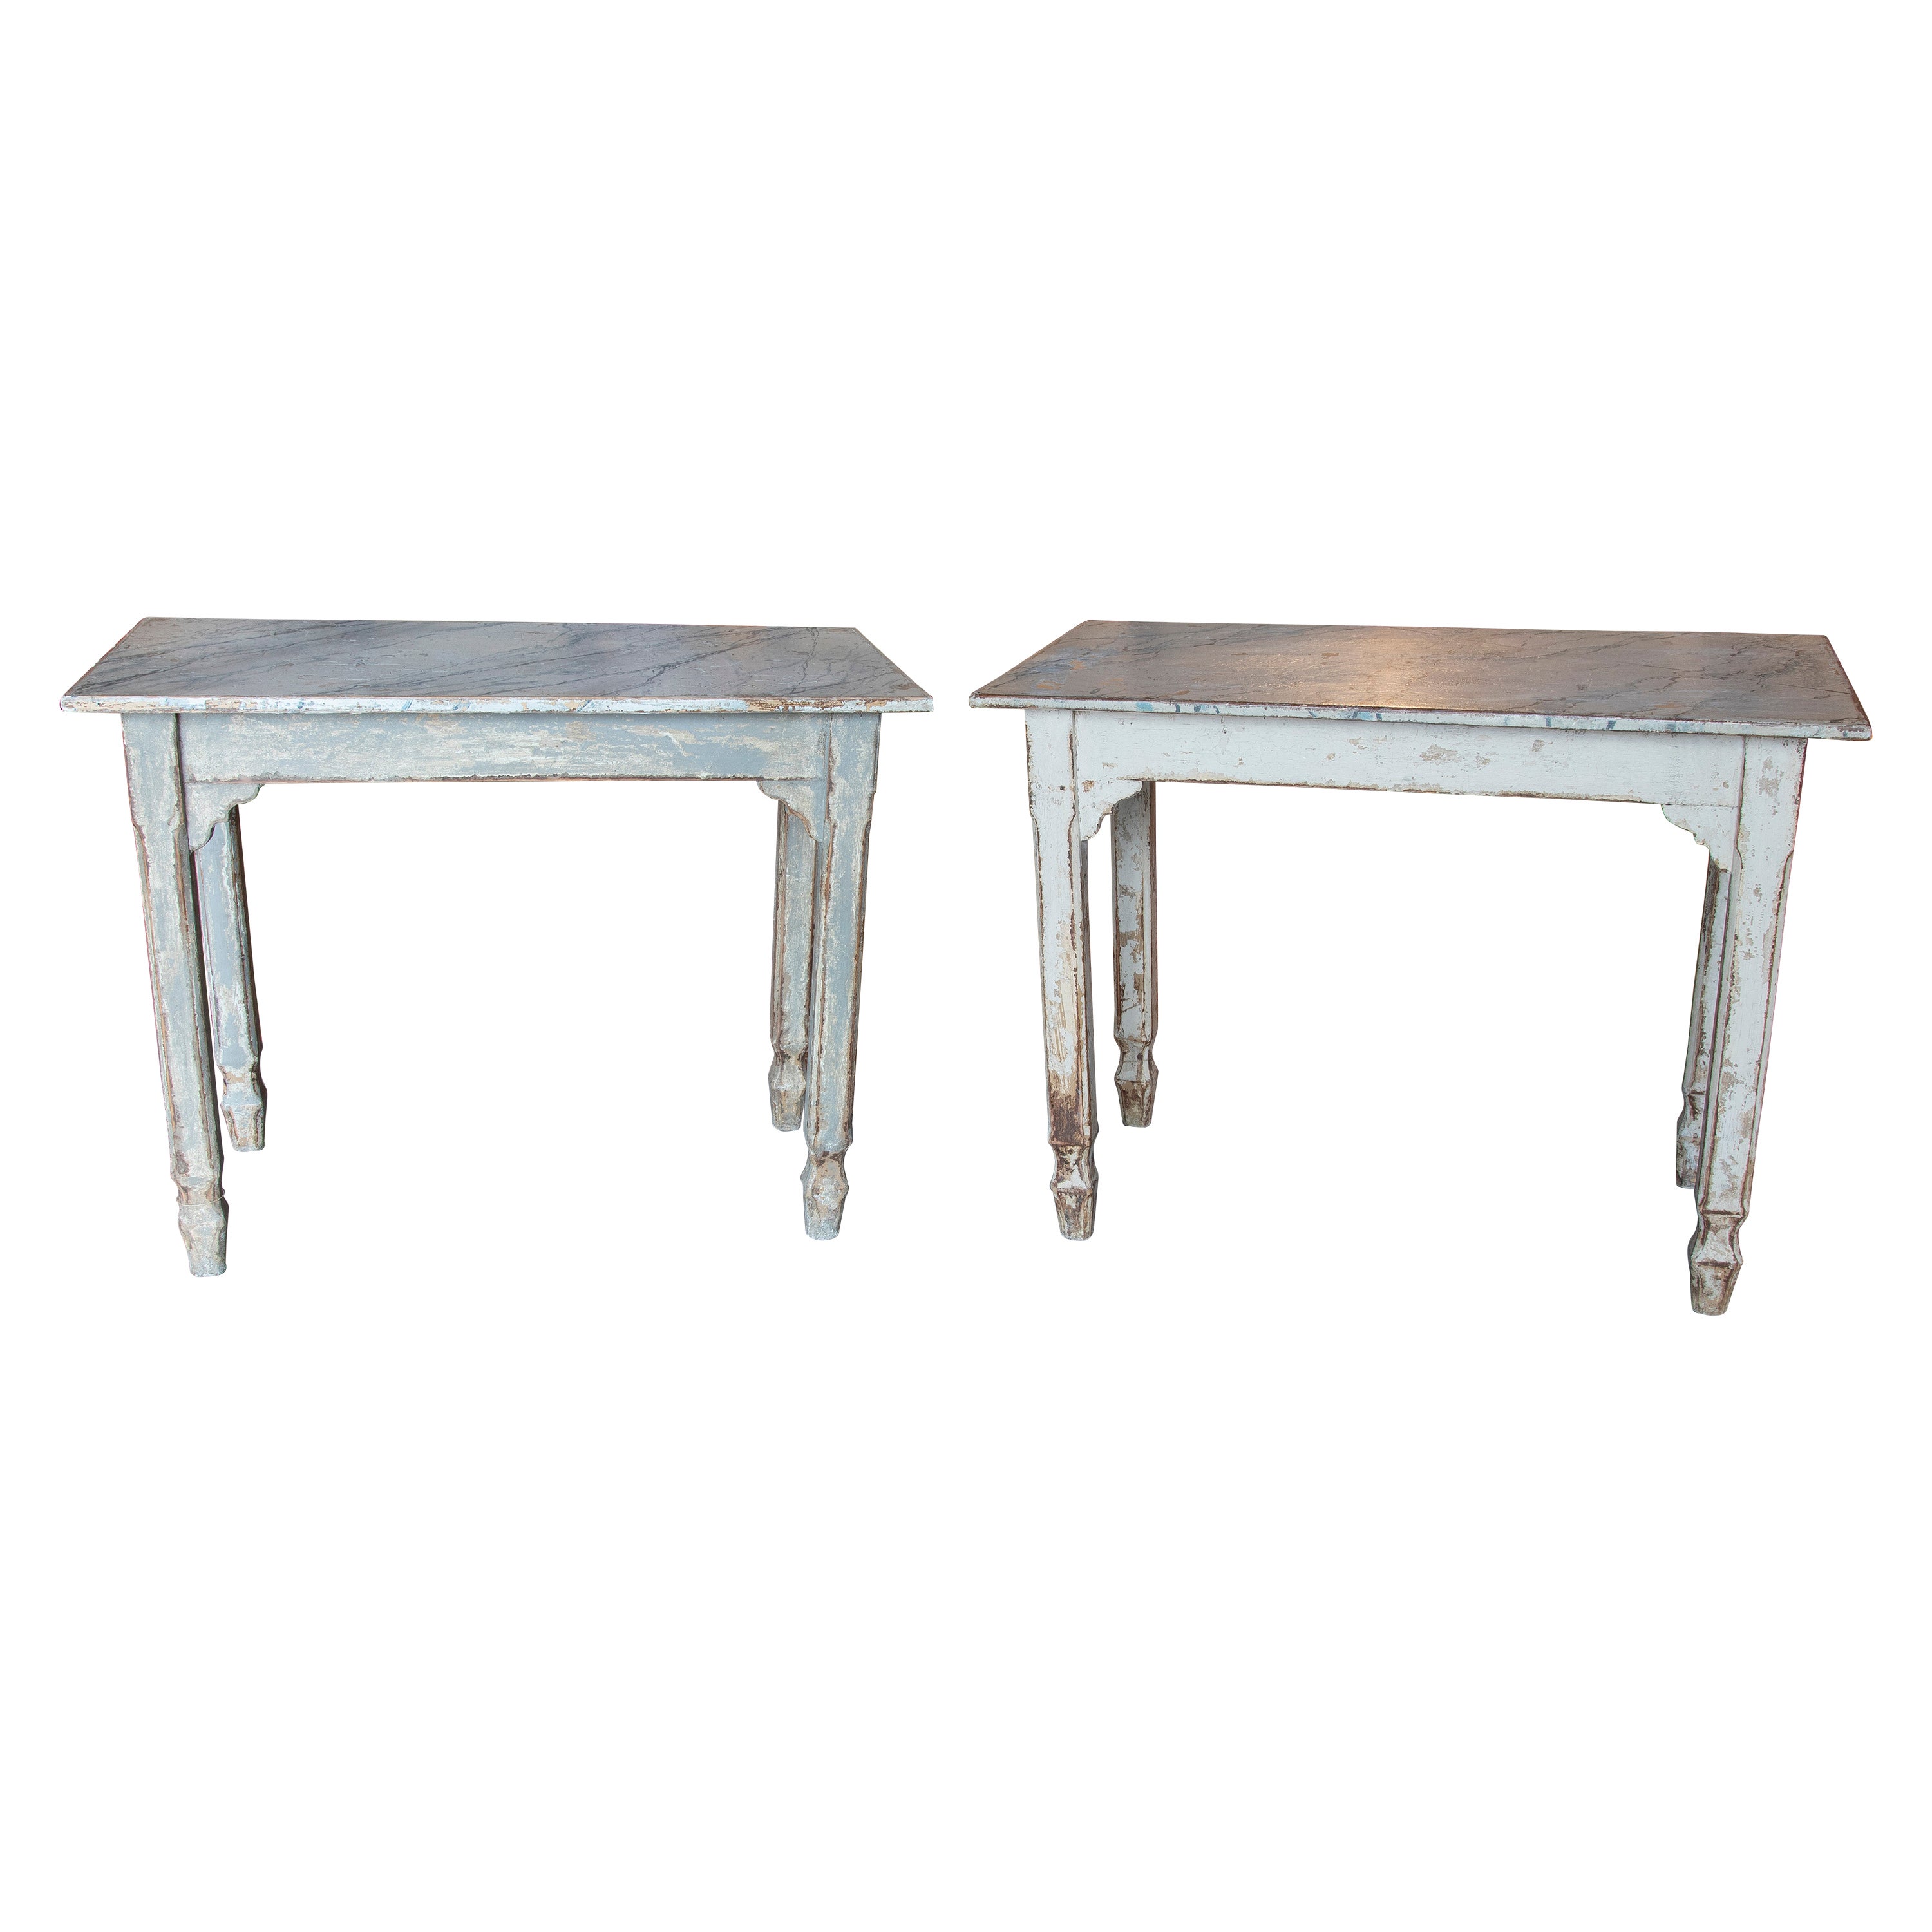 Spanish Pair of Wooden Tables with Hand-Painted Marbling 